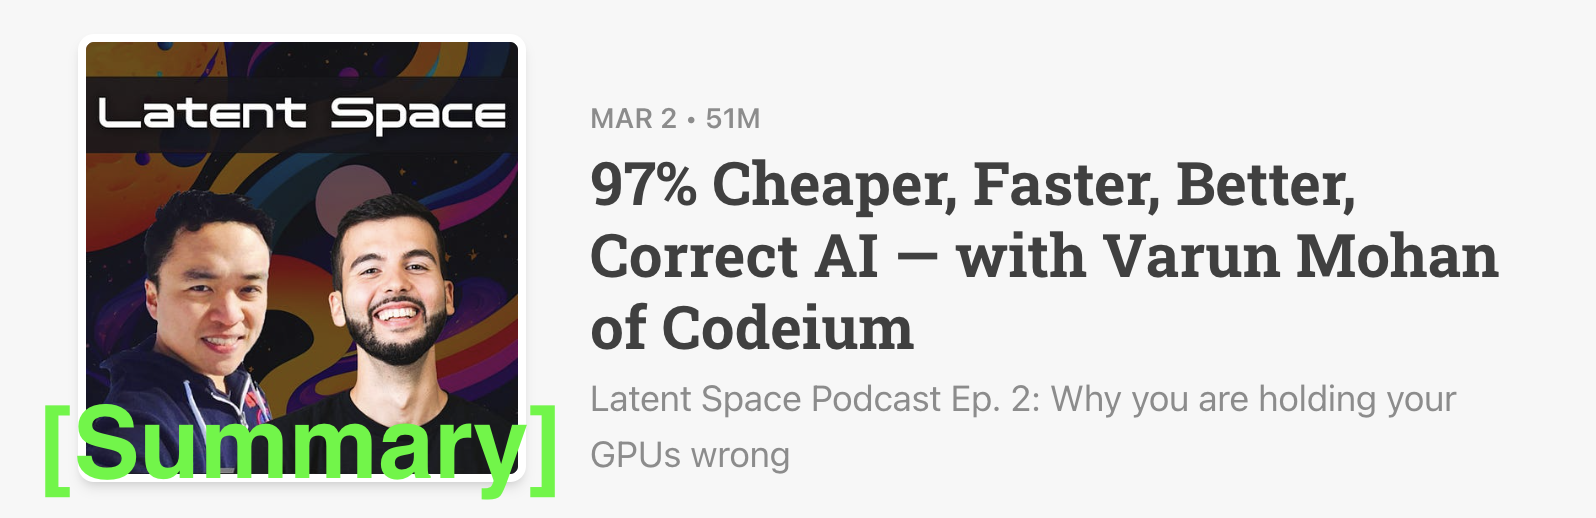 Latent Space Podcast 3/2/23 [Summary] - 97% Cheaper, Faster, Better, Correct AI — with Varun Mohan of Codeium Latent Space Podcast Ep. 2: Why you are holding your GPUs wrong